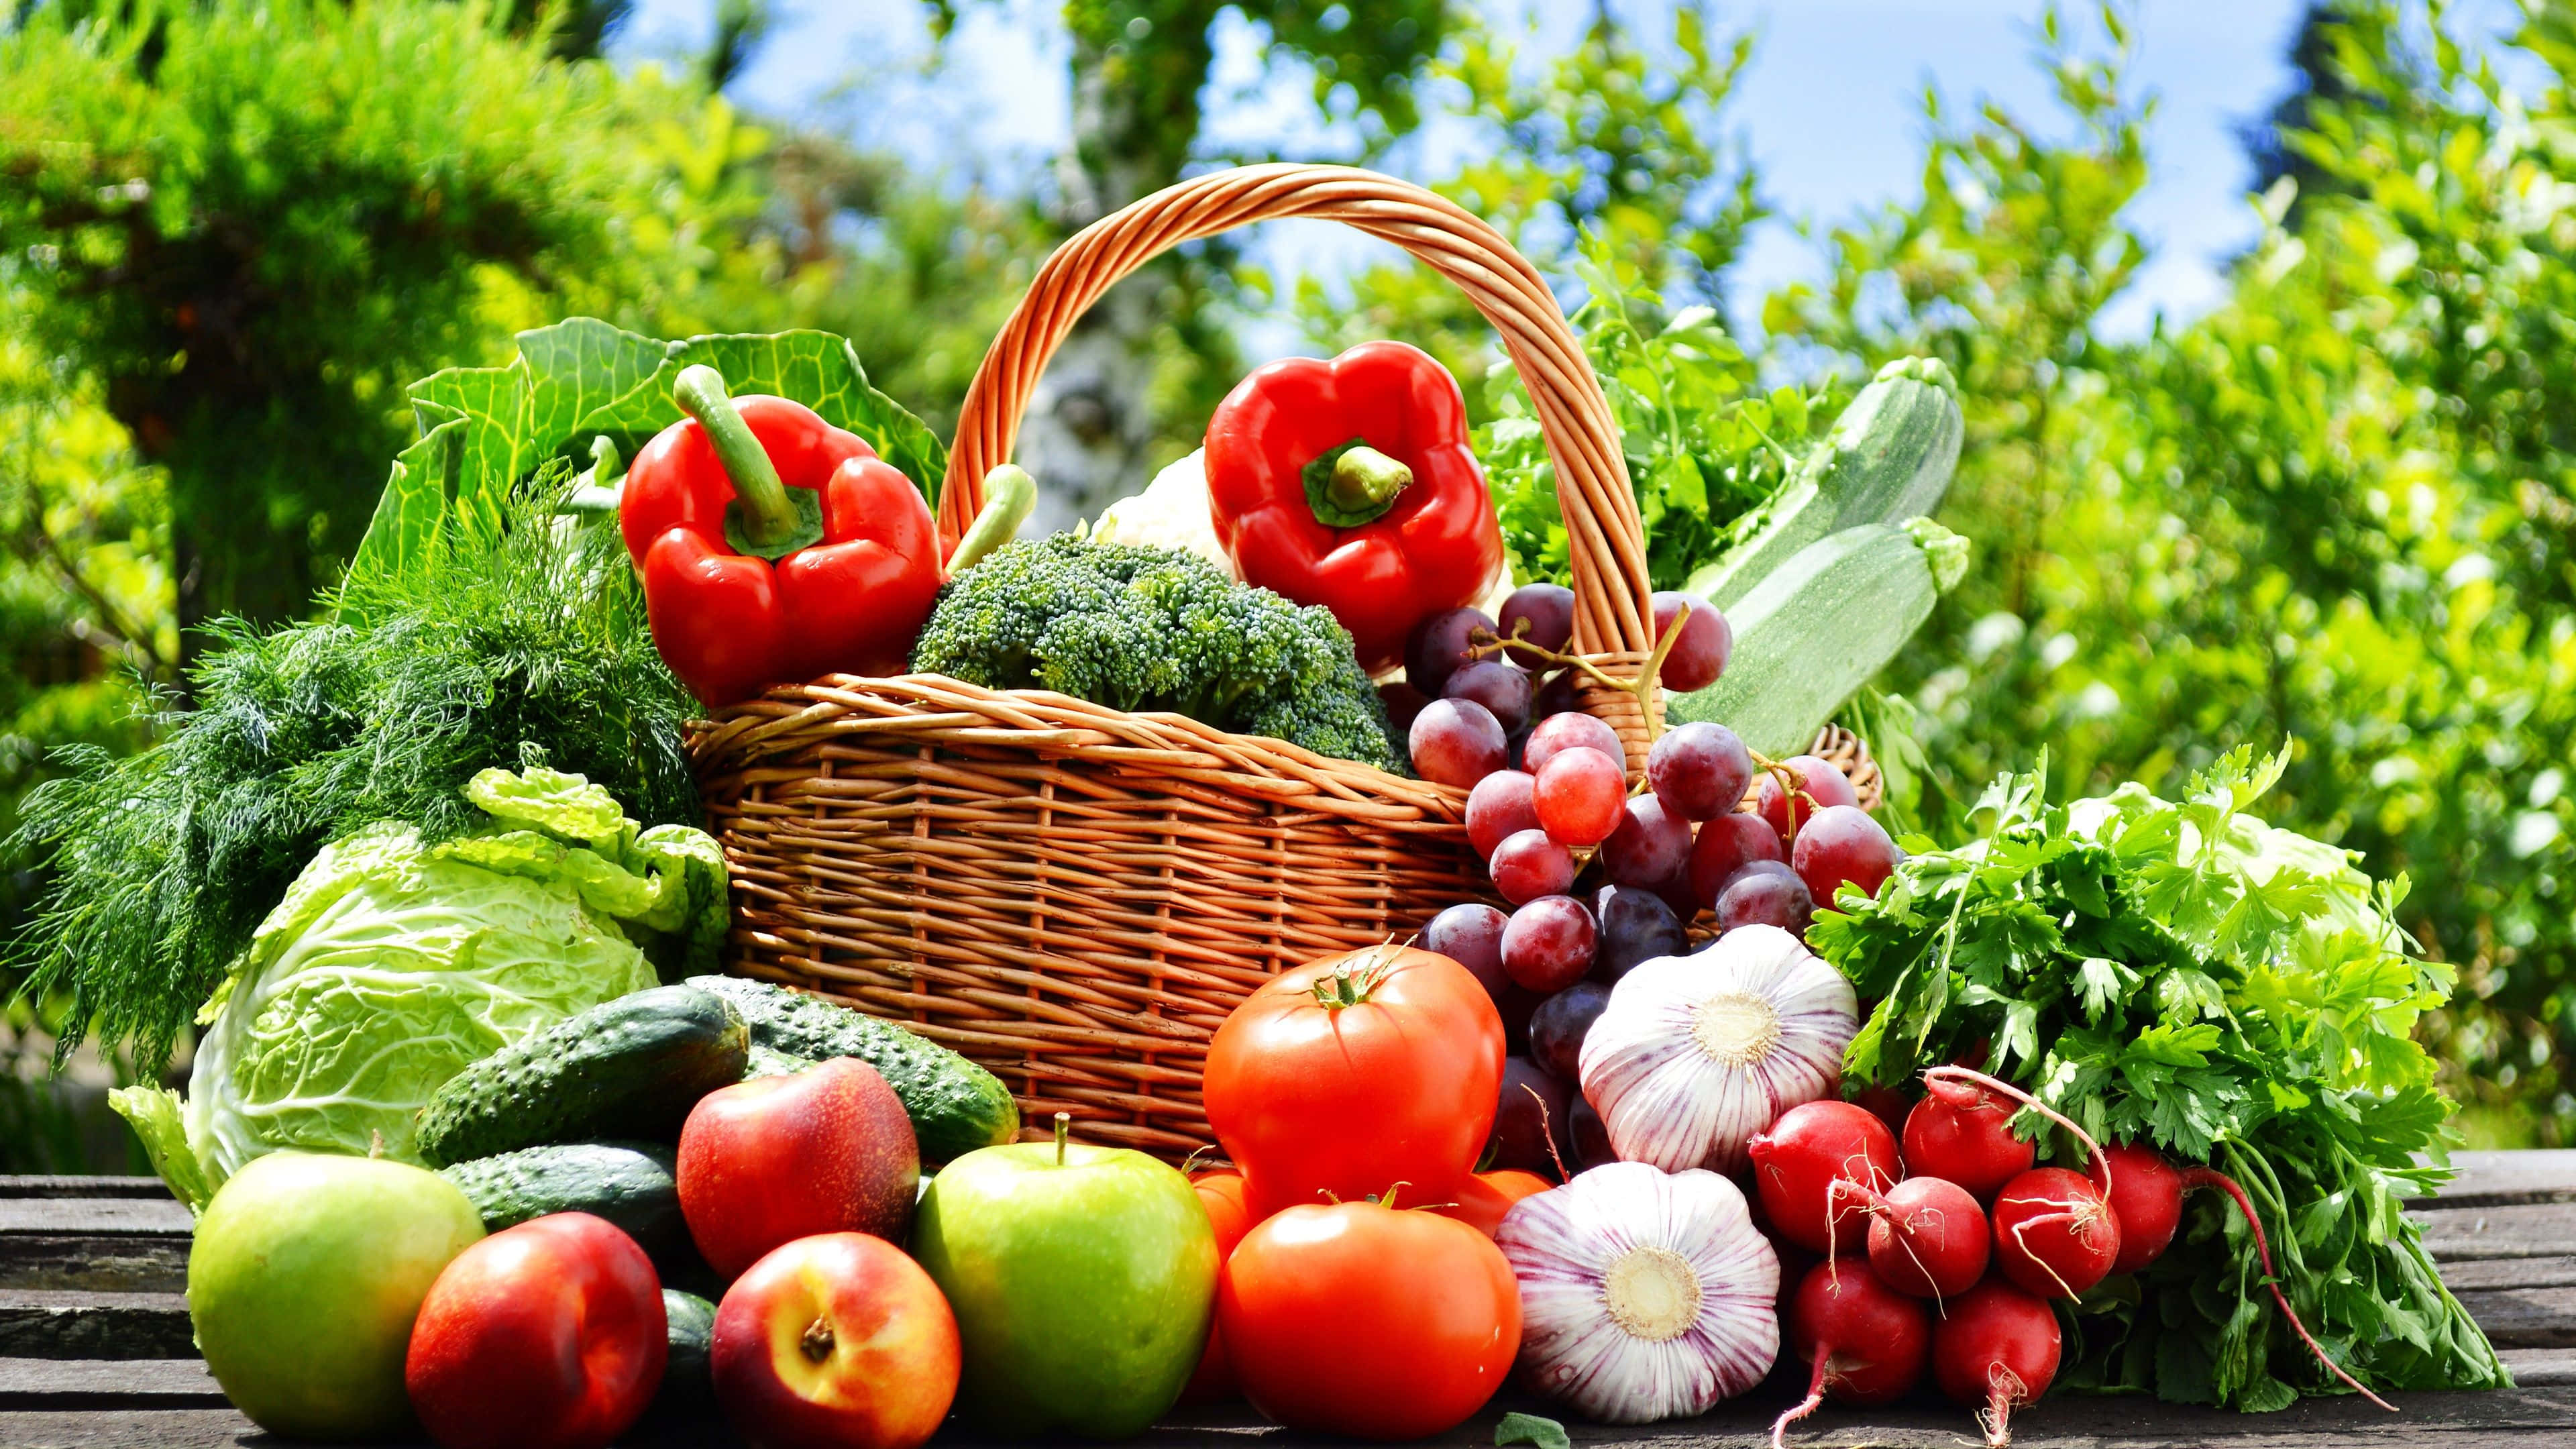 Basket Of Fruits And Vegetables Picture